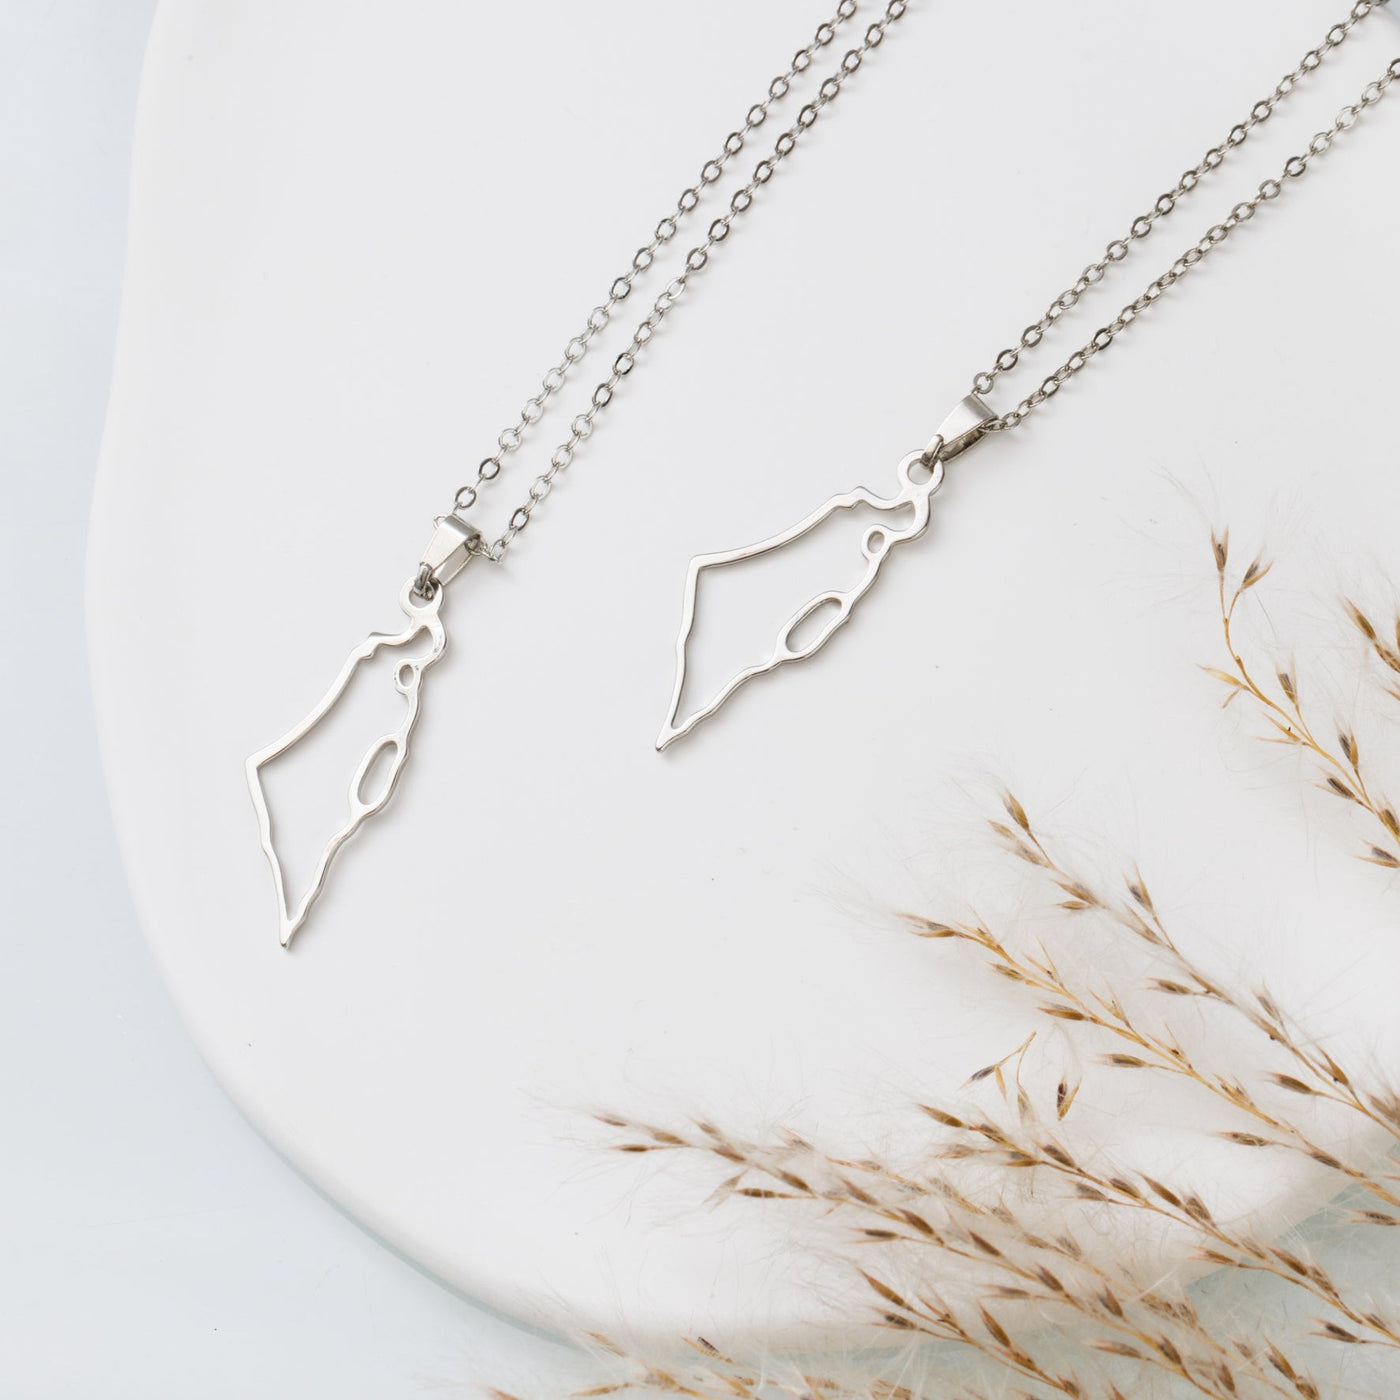 Israel Map Necklace in a classic design - Michal